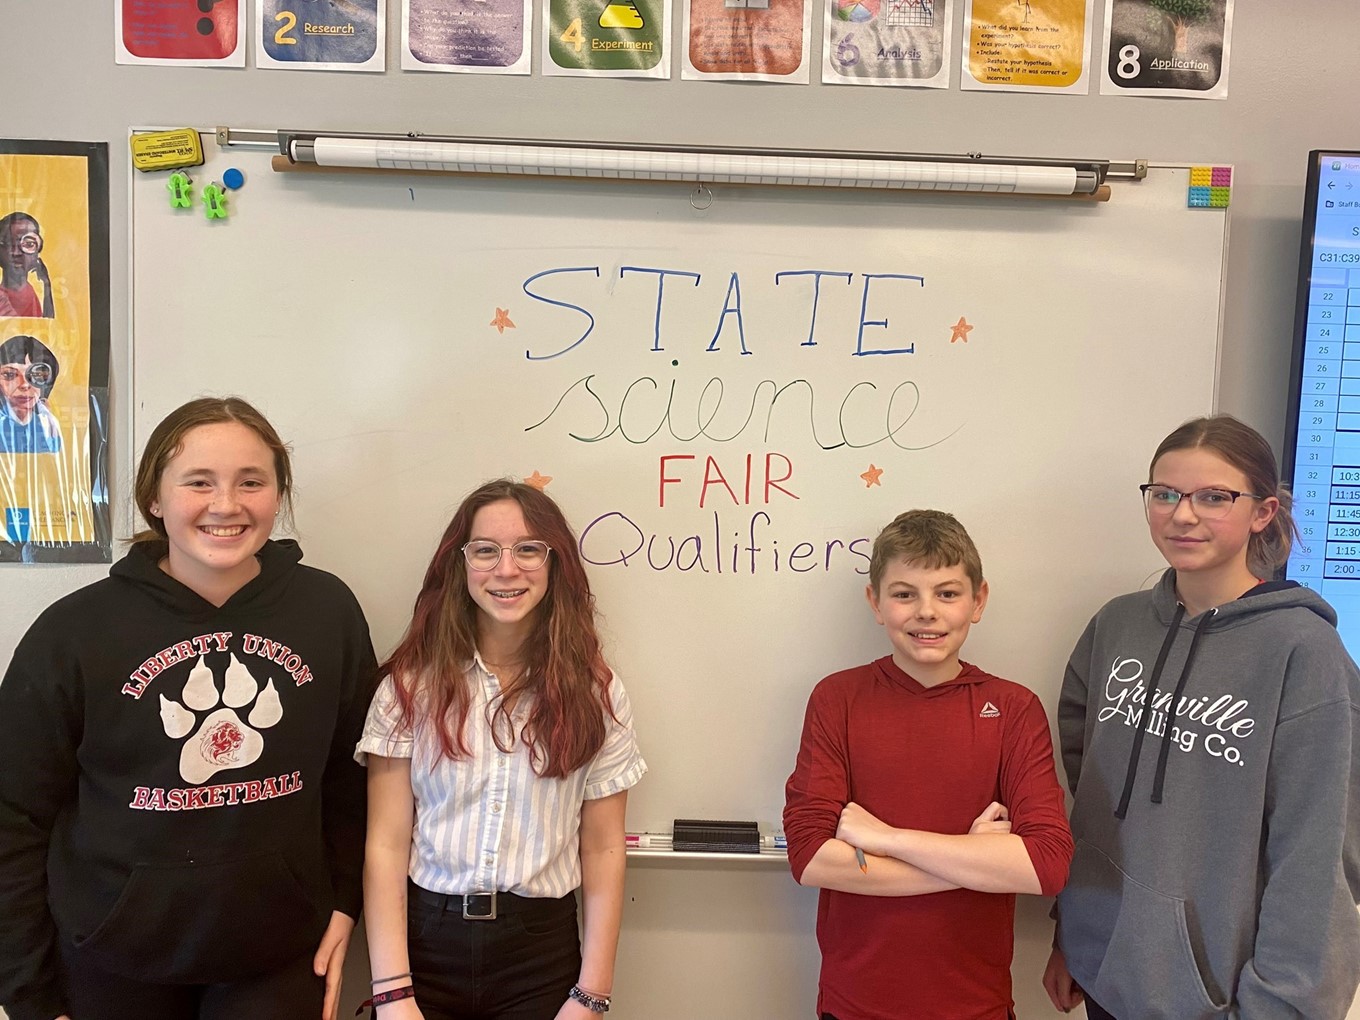 Middle School State Science Fair Qualifiers